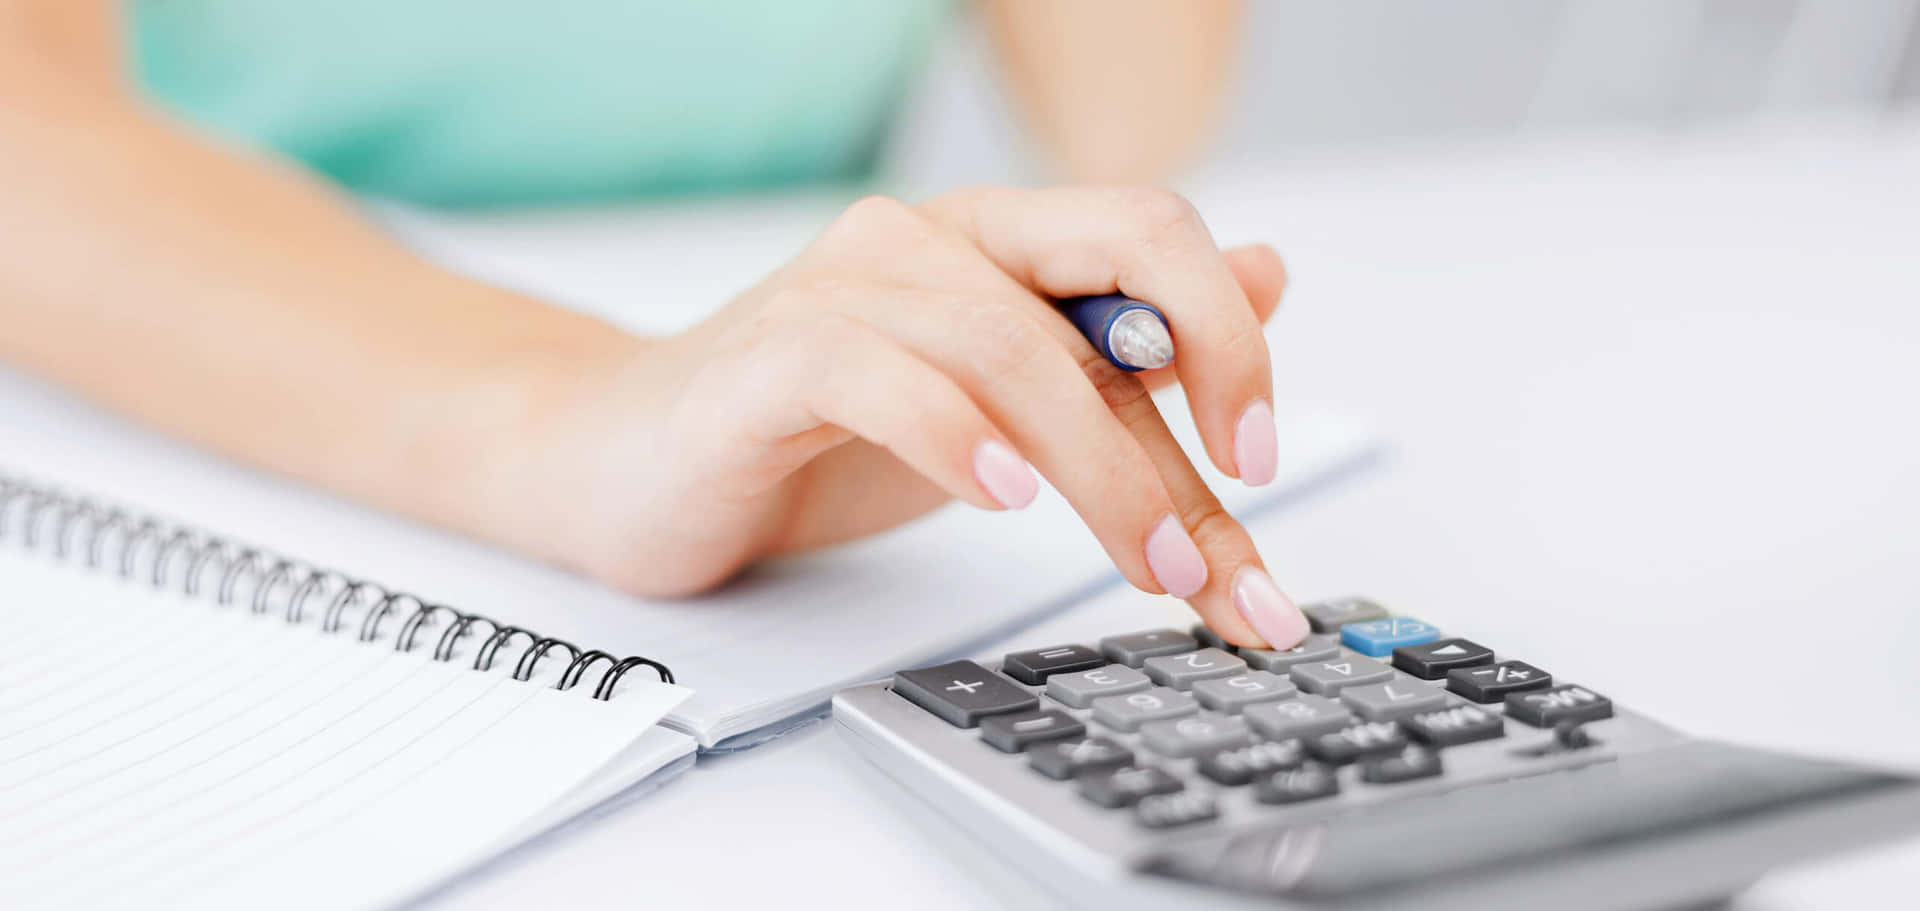 A Woman Is Using A Calculator On A Desk